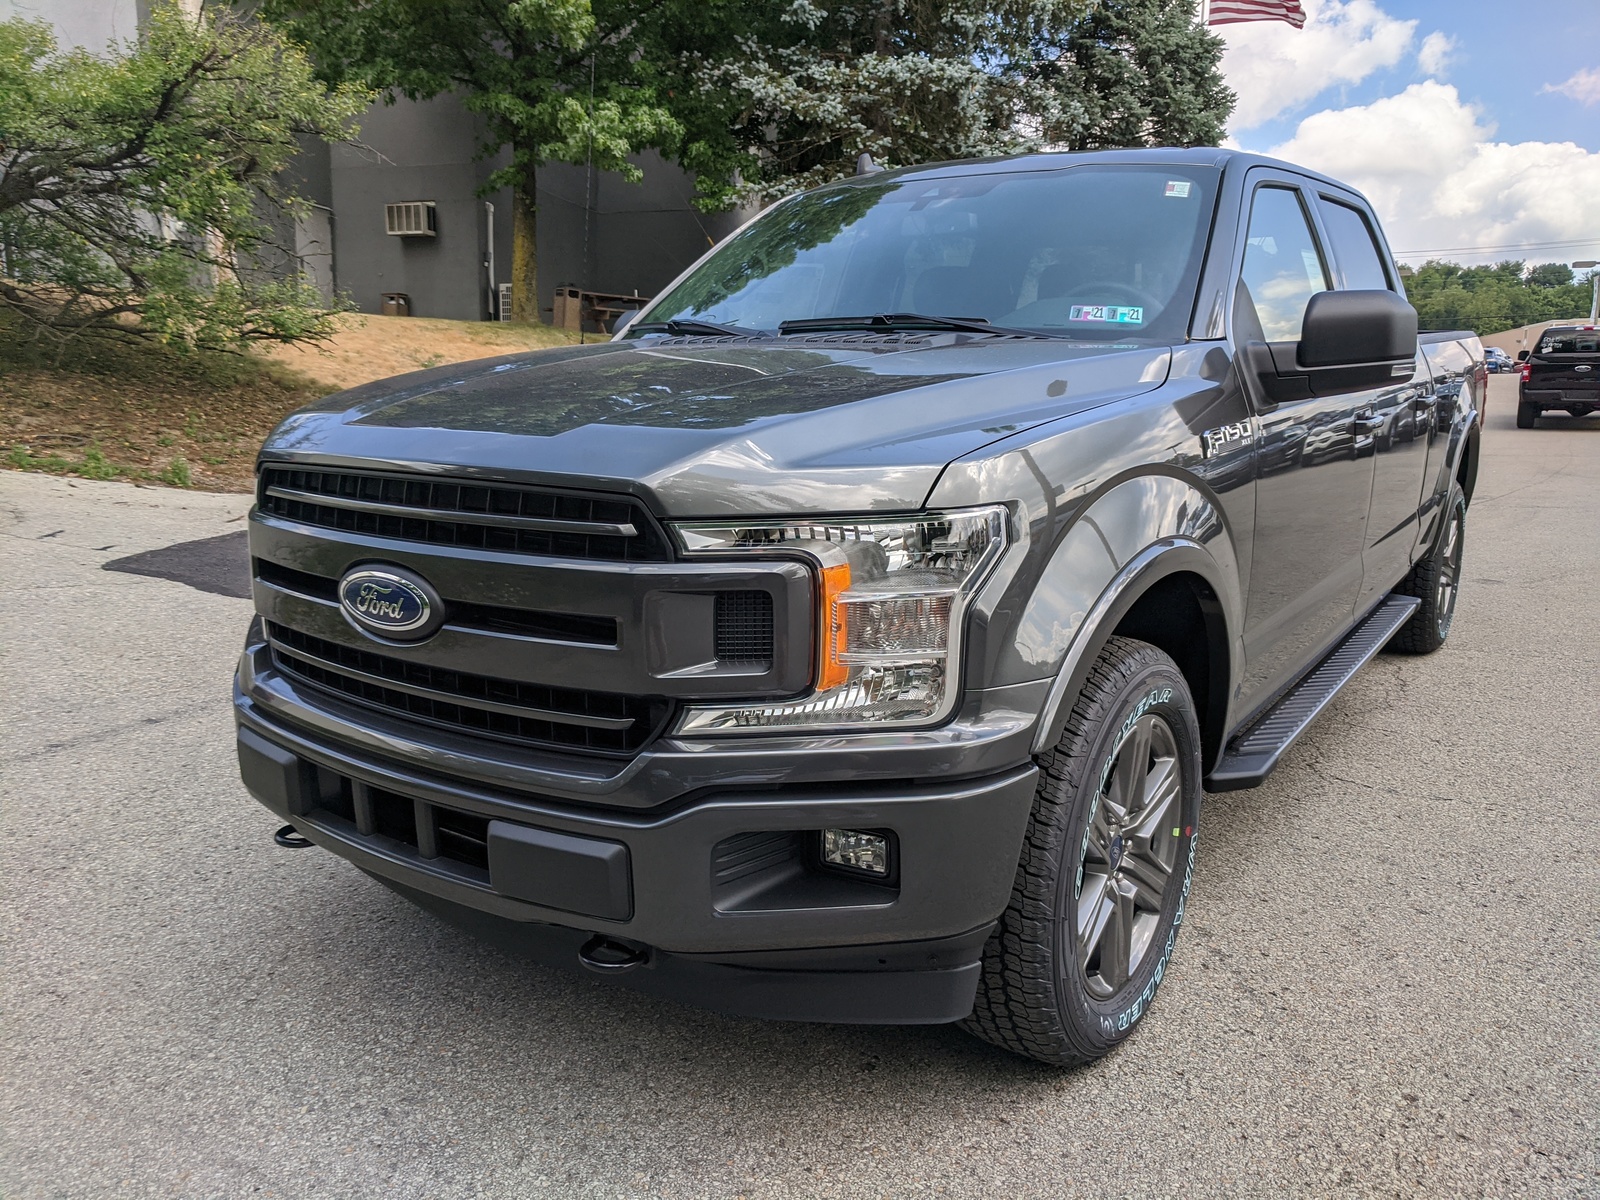 New 2020 Ford F-150 XLT in Magnetic Metallic | Greensburg, PA | #F03504